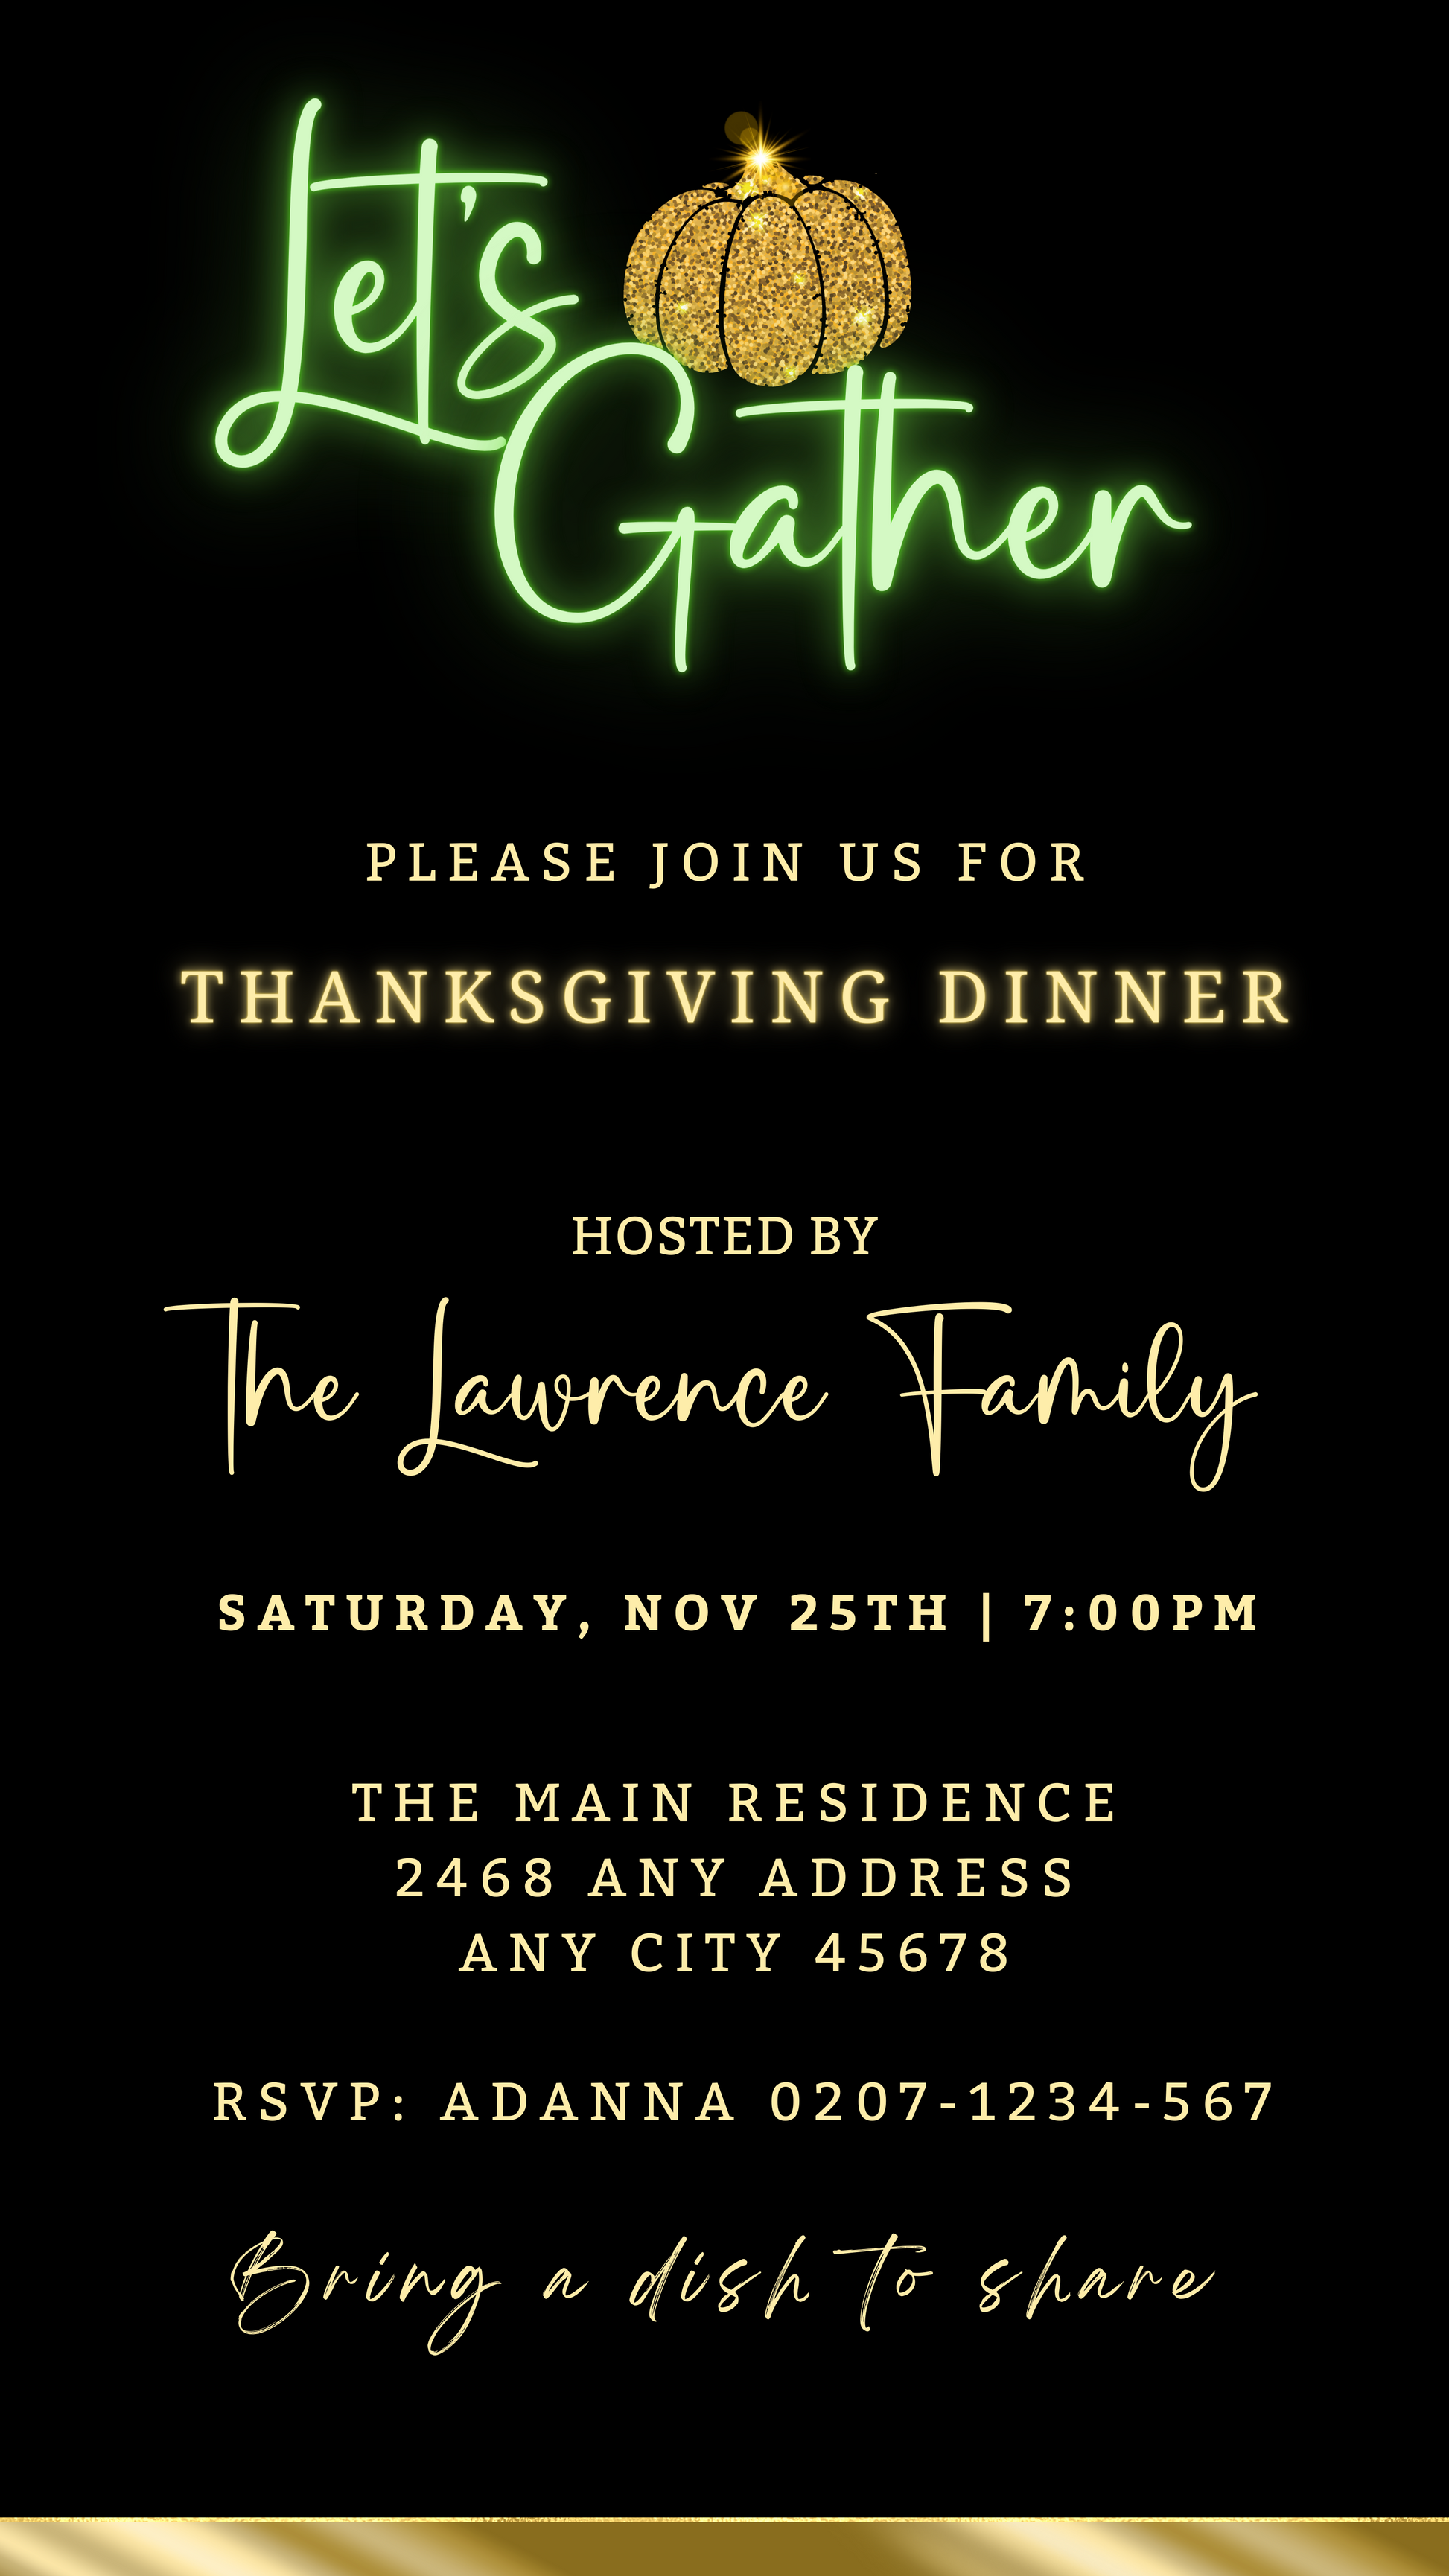 Green Neon Black Gold Pumpkin Thanksgiving Dinner Evite template featuring a glowing pumpkin and customizable text for digital invitations via Canva.